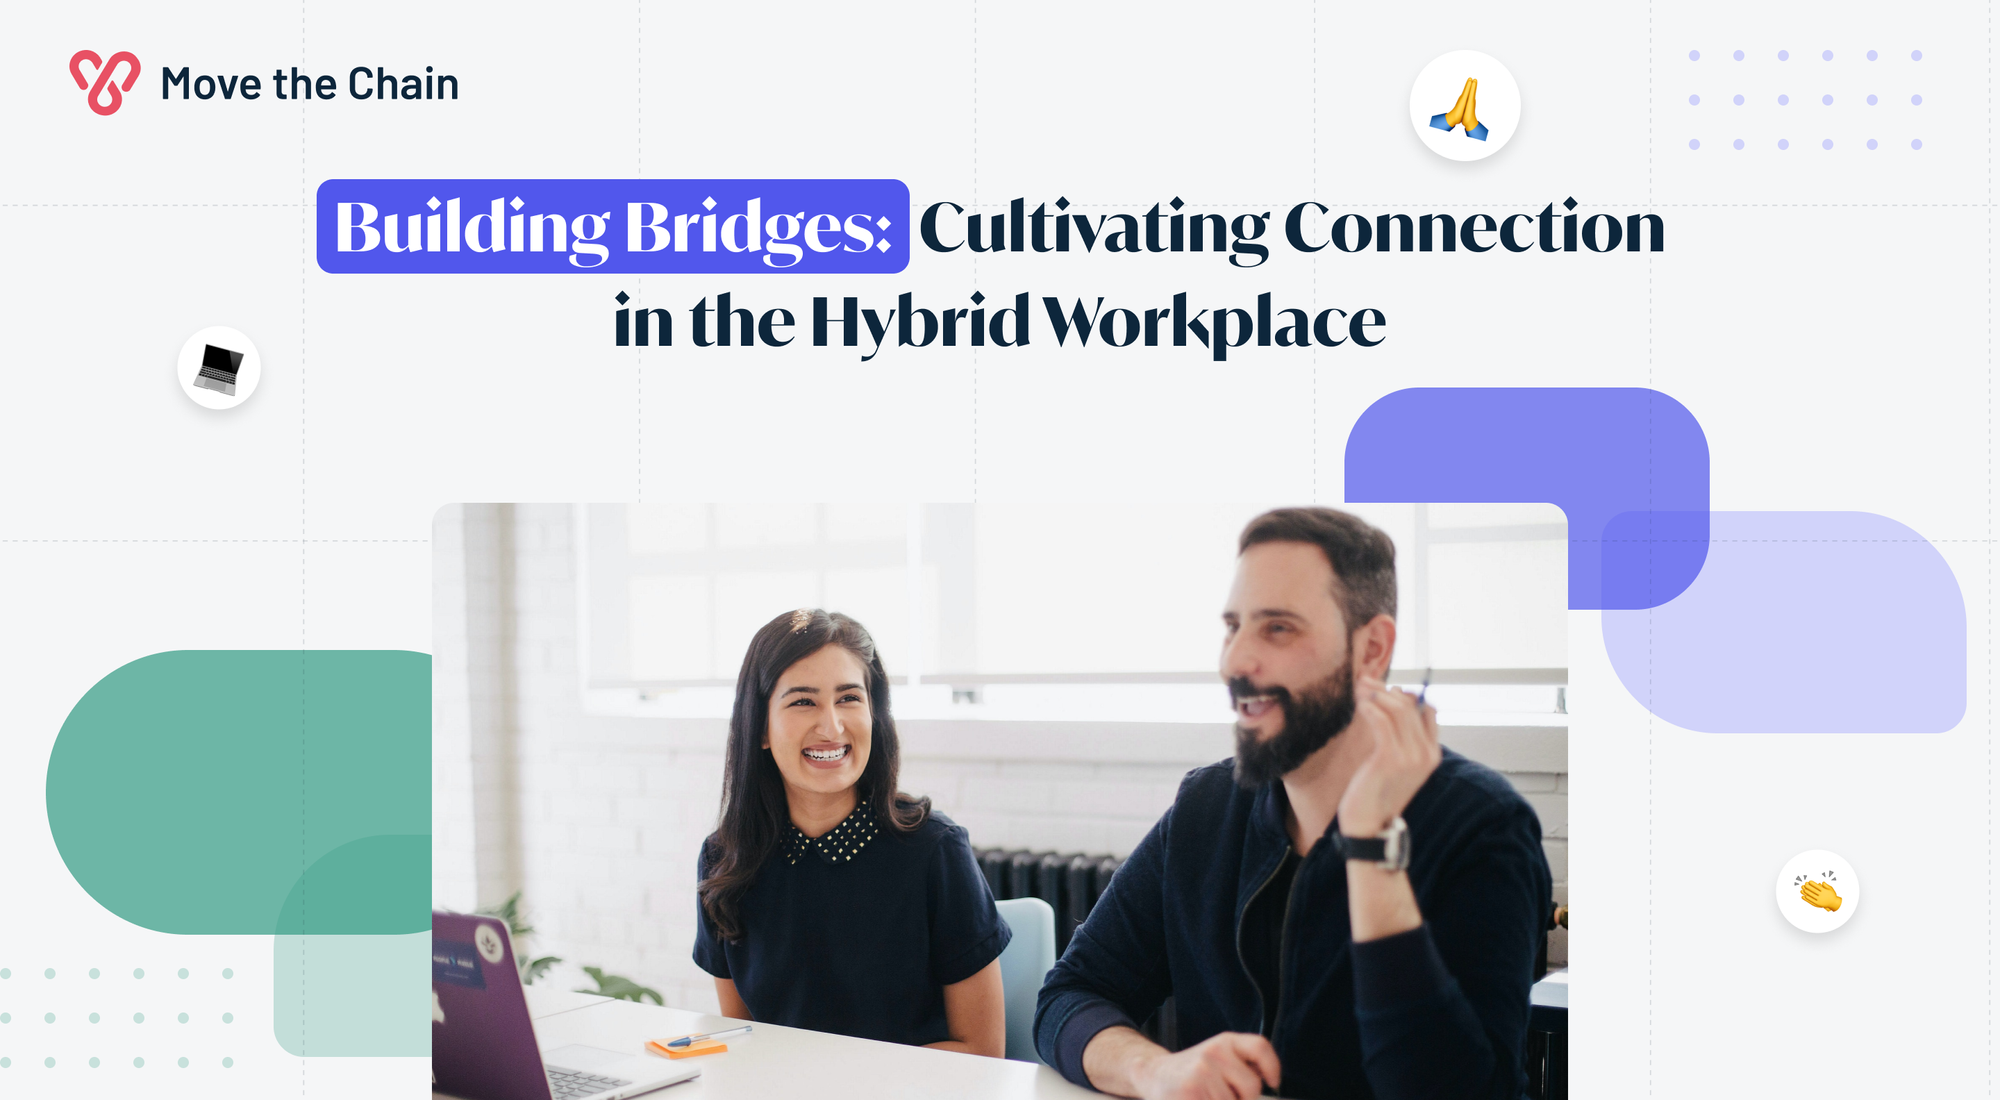 Building Bridges: Cultivating Connection in the Hybrid Workplace